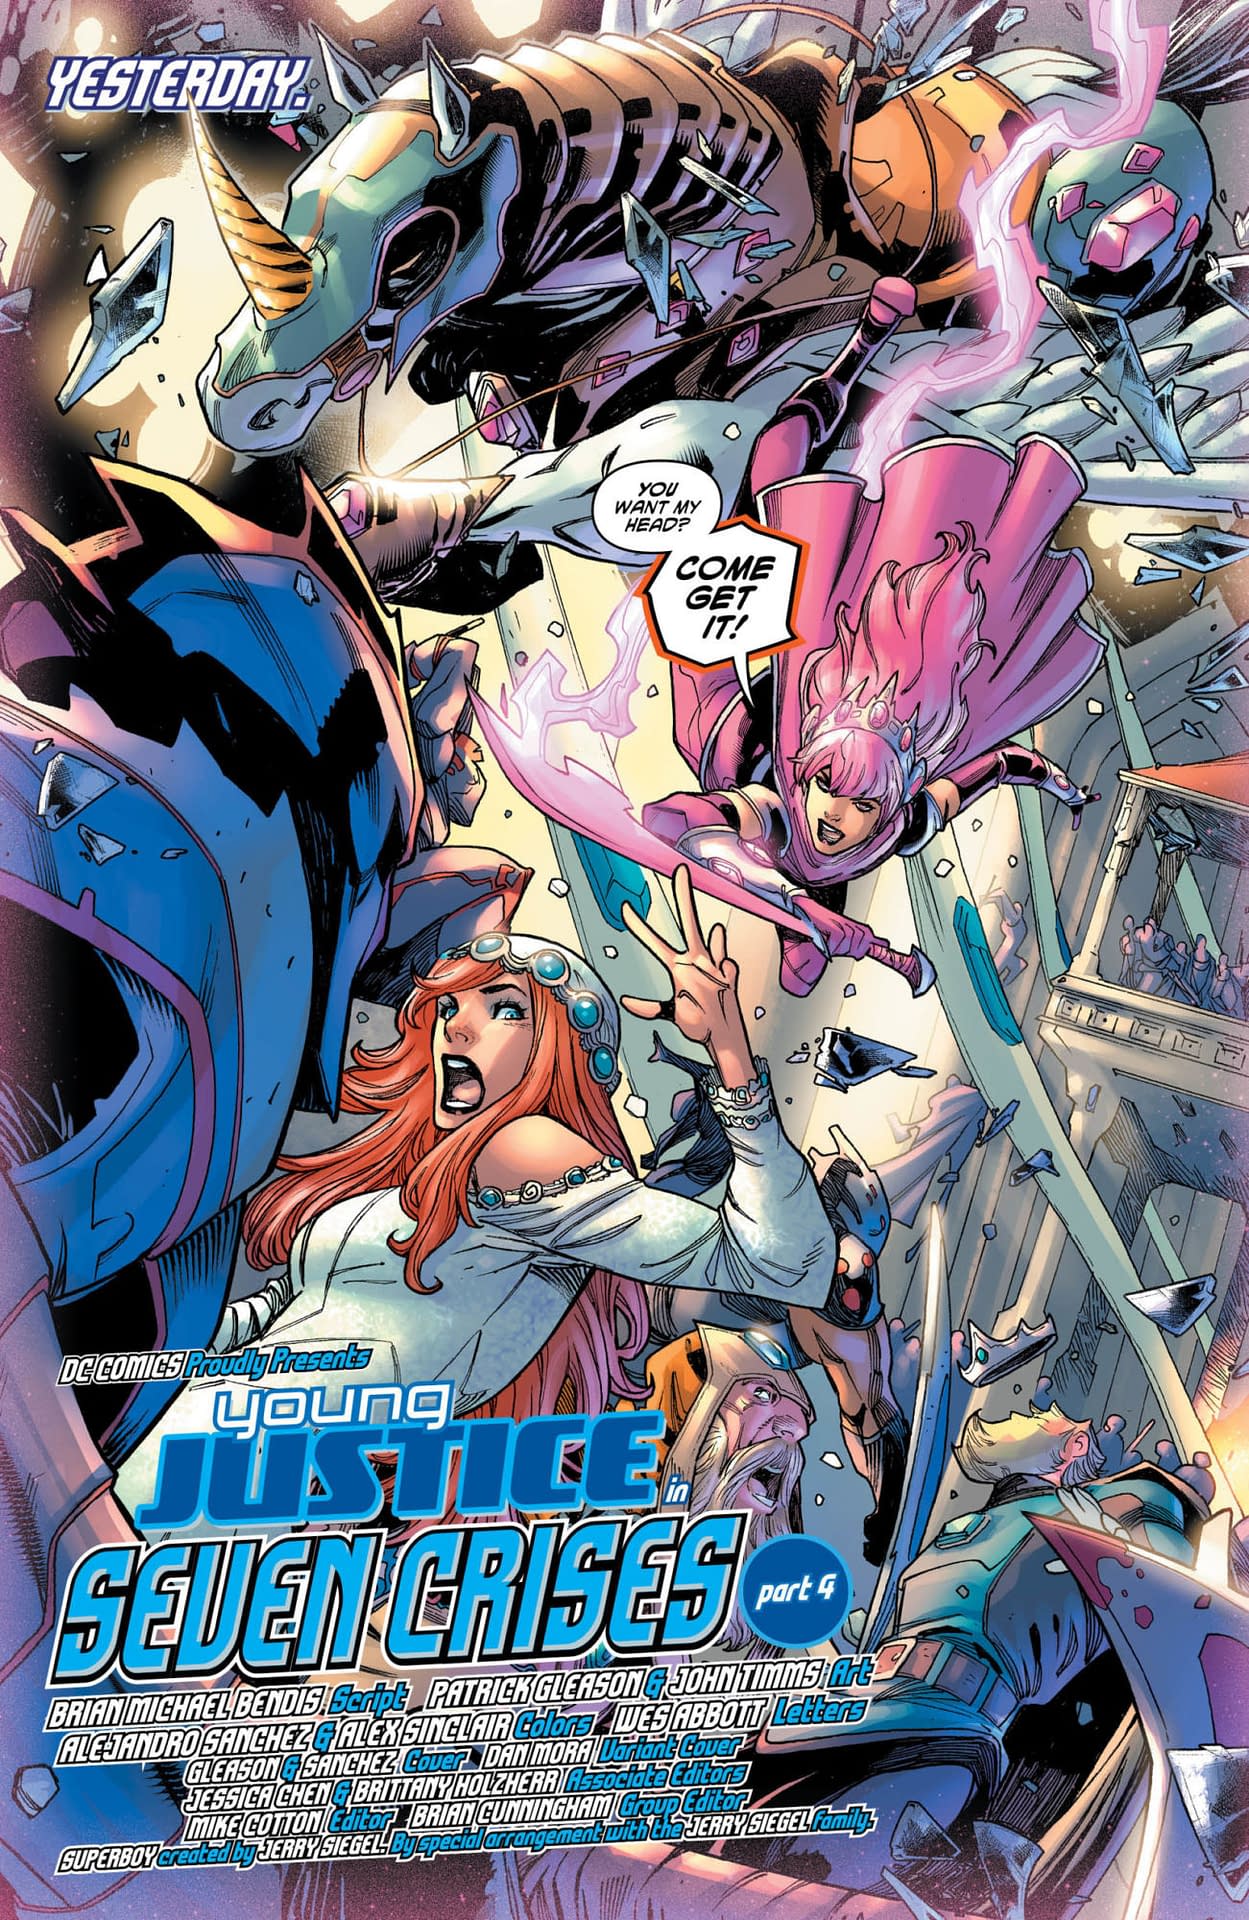 Ain't No Party Like a Gemworld Wedding Party in Tomorrow's Young Justice #4